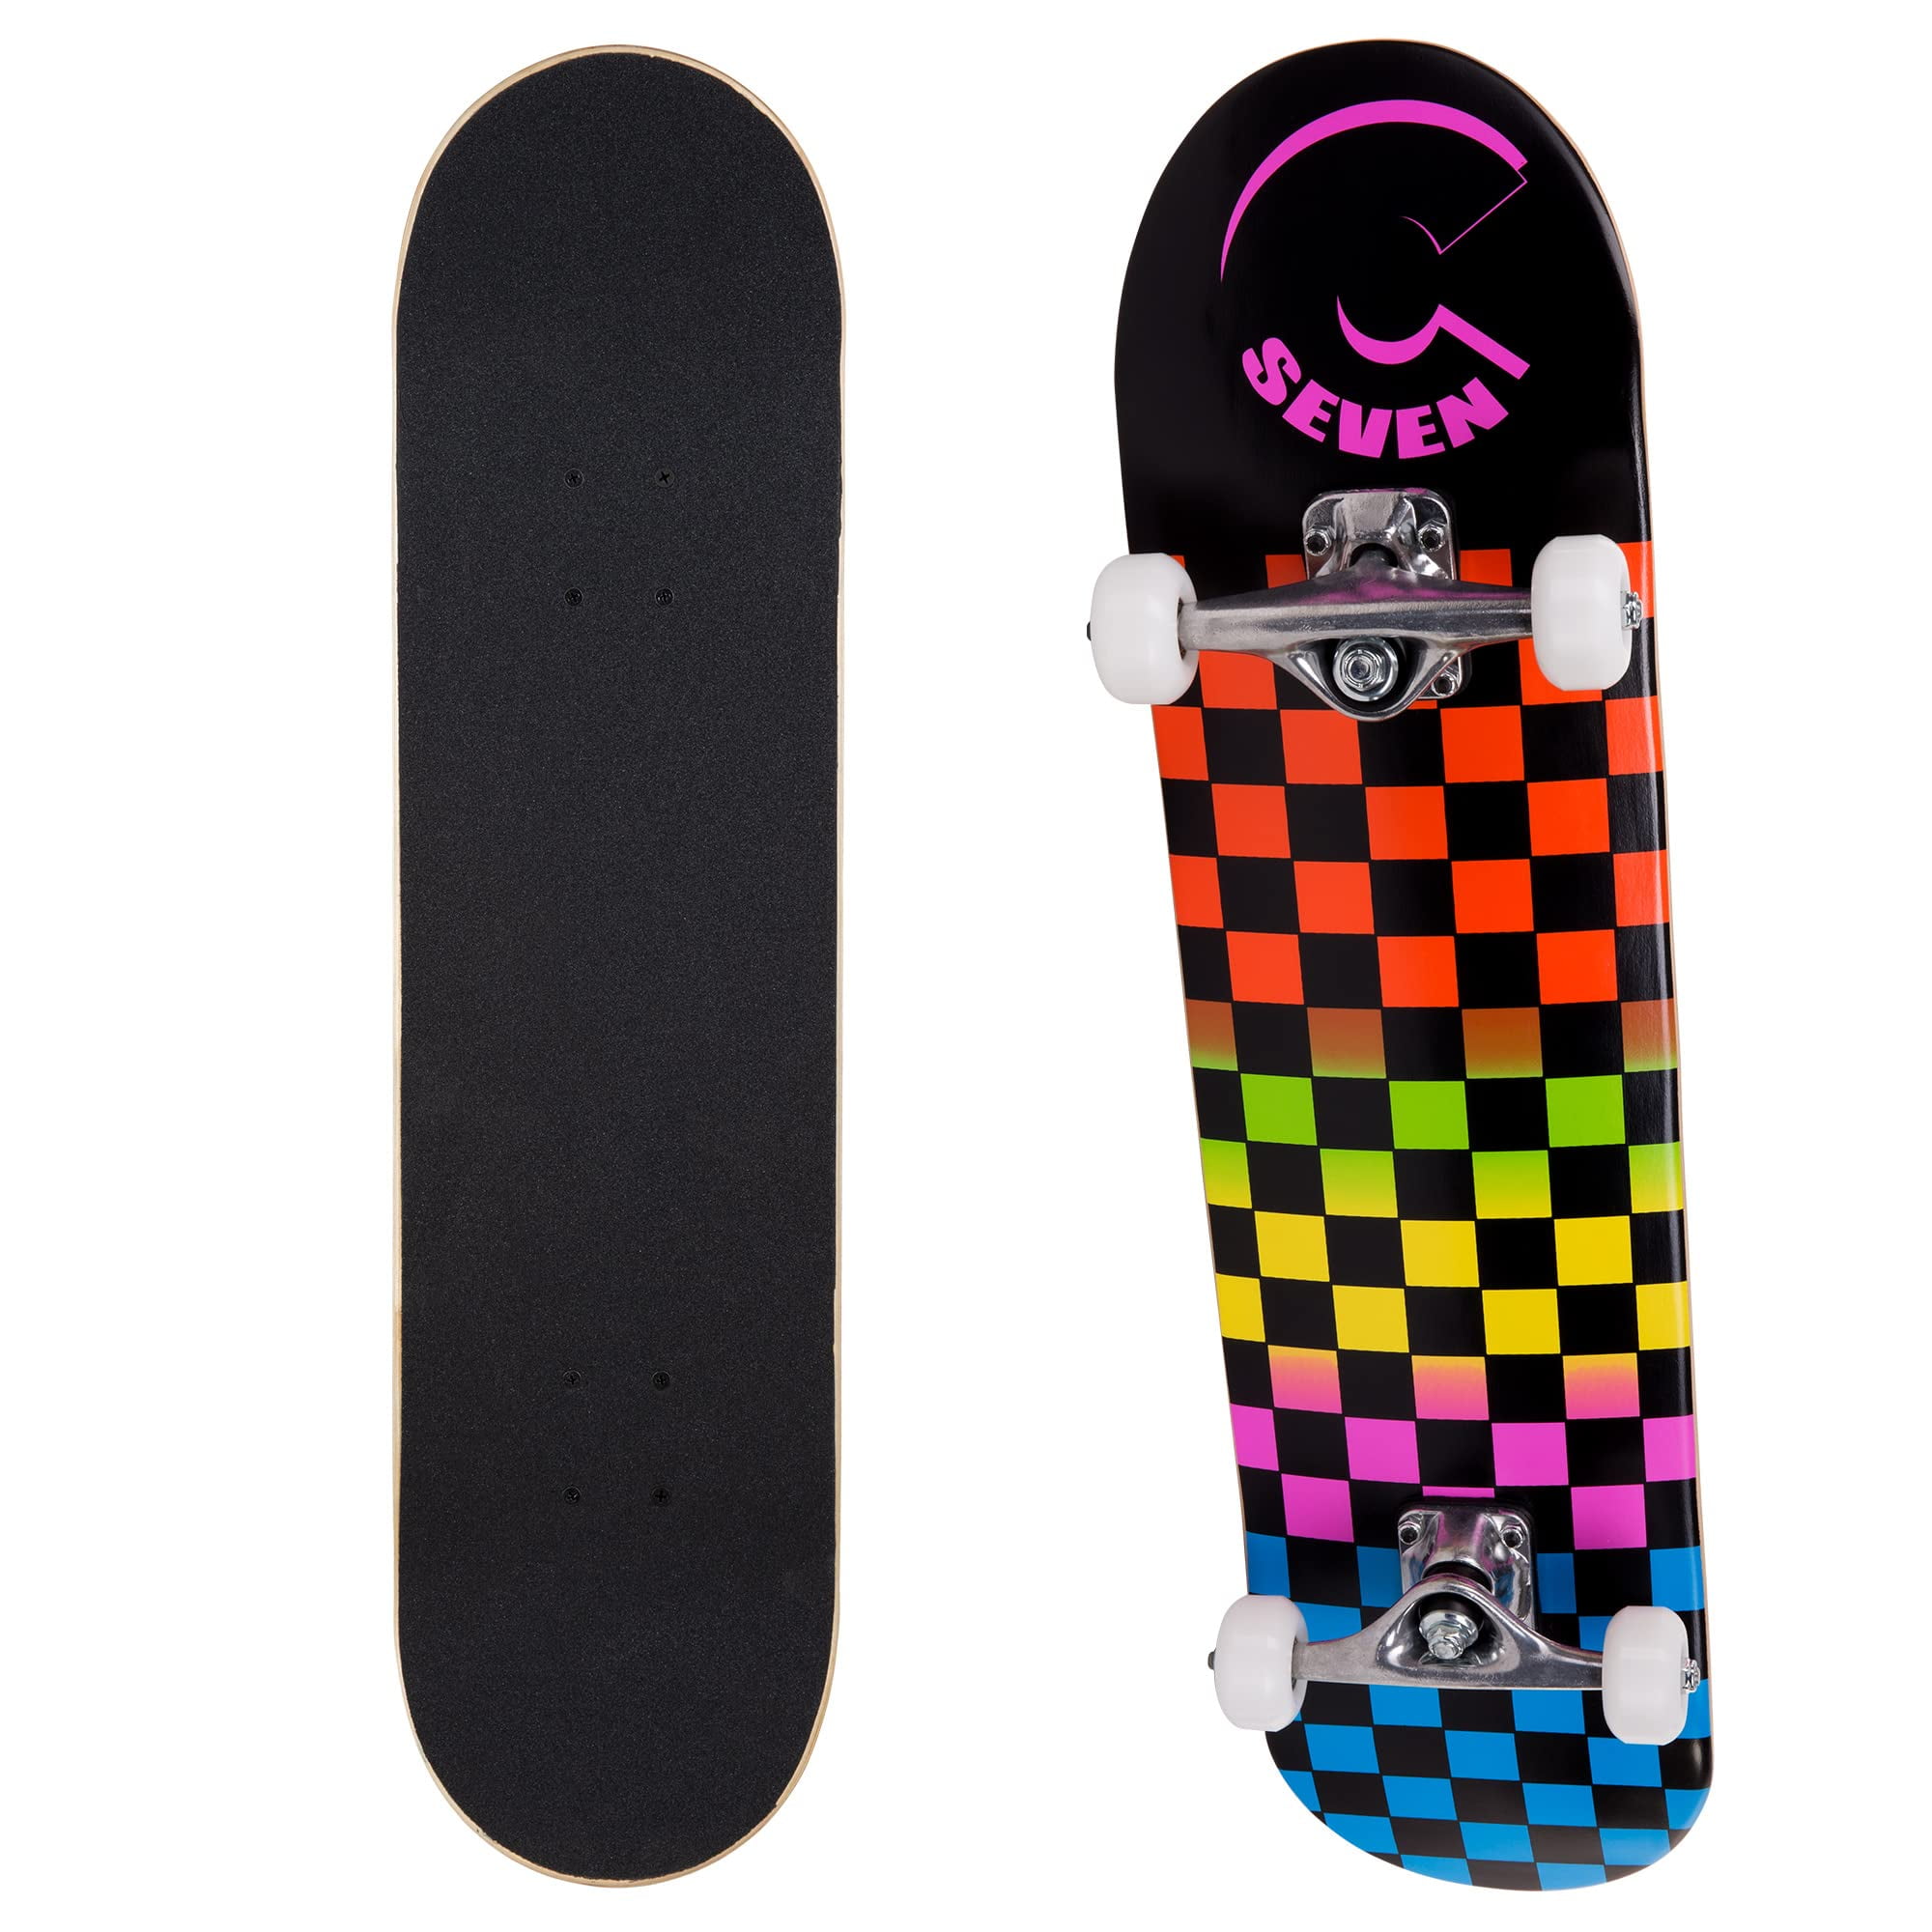 Cal 7 8 In. Complete Popsicle Skateboard (Rainbow)